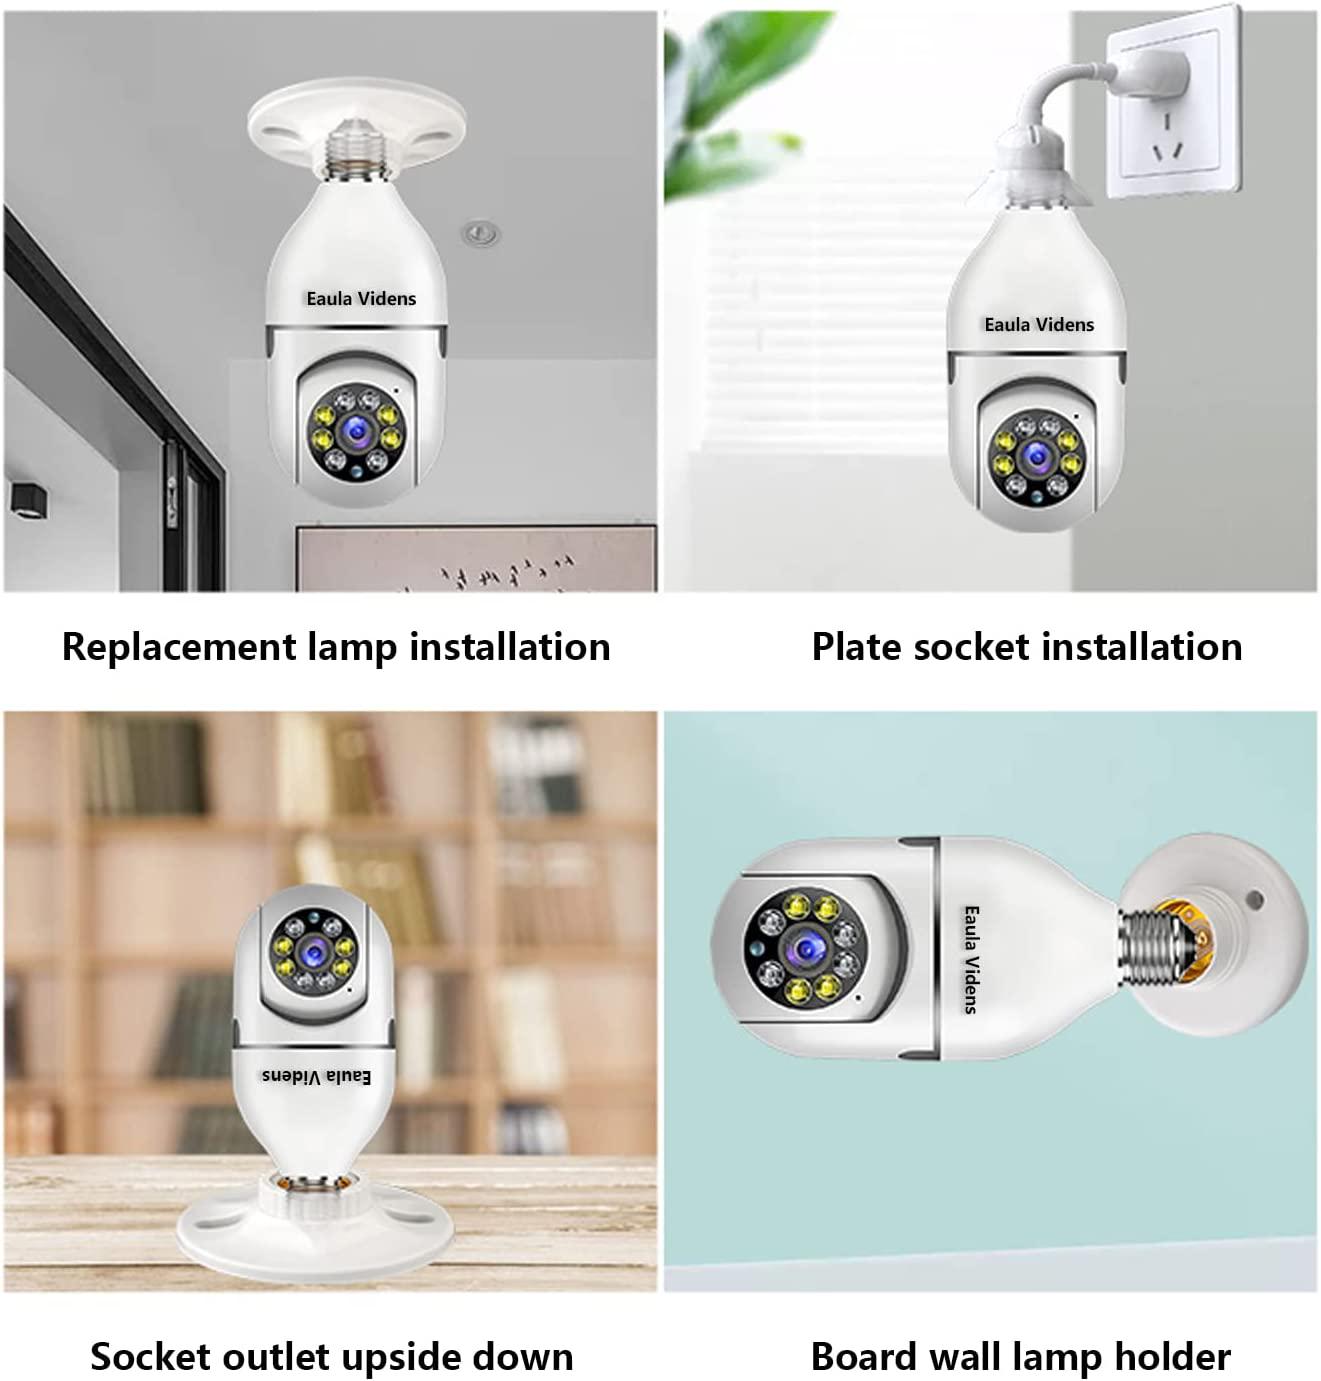 Eaula Videns, Light Bulb Security Camera 1080P, PTZ WiFi 360 Degree E27 Panoramic IP Camera,Night Vision Color, Motion Detection,Support WIFI2.4GHZ/5.0GHZ, APP Access(White) (Security Camera)